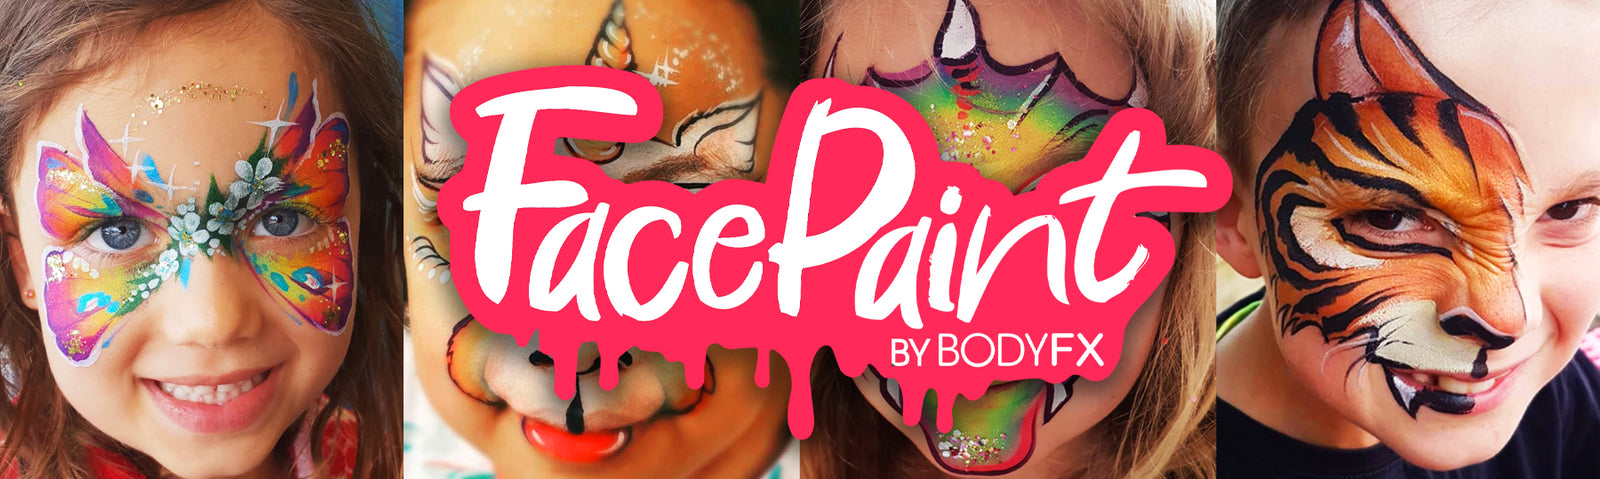 Face Body Paint Oil, Professional 20 Colors FX Makeup Palette- Non Toxic Hypoallergenic Safe Facepaints for Adults and Kids